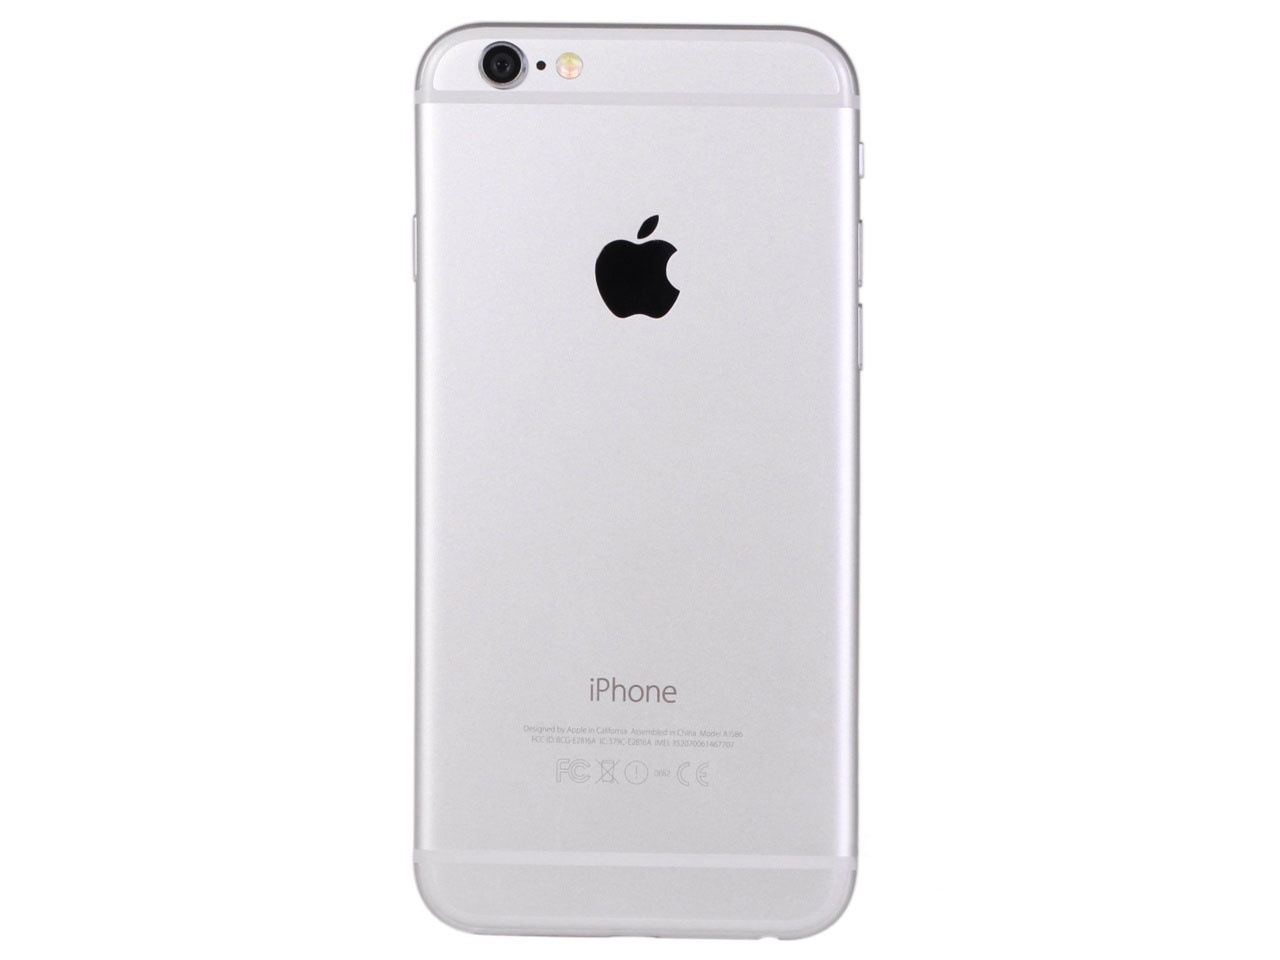 Apple iPhone 6 64GB rear view